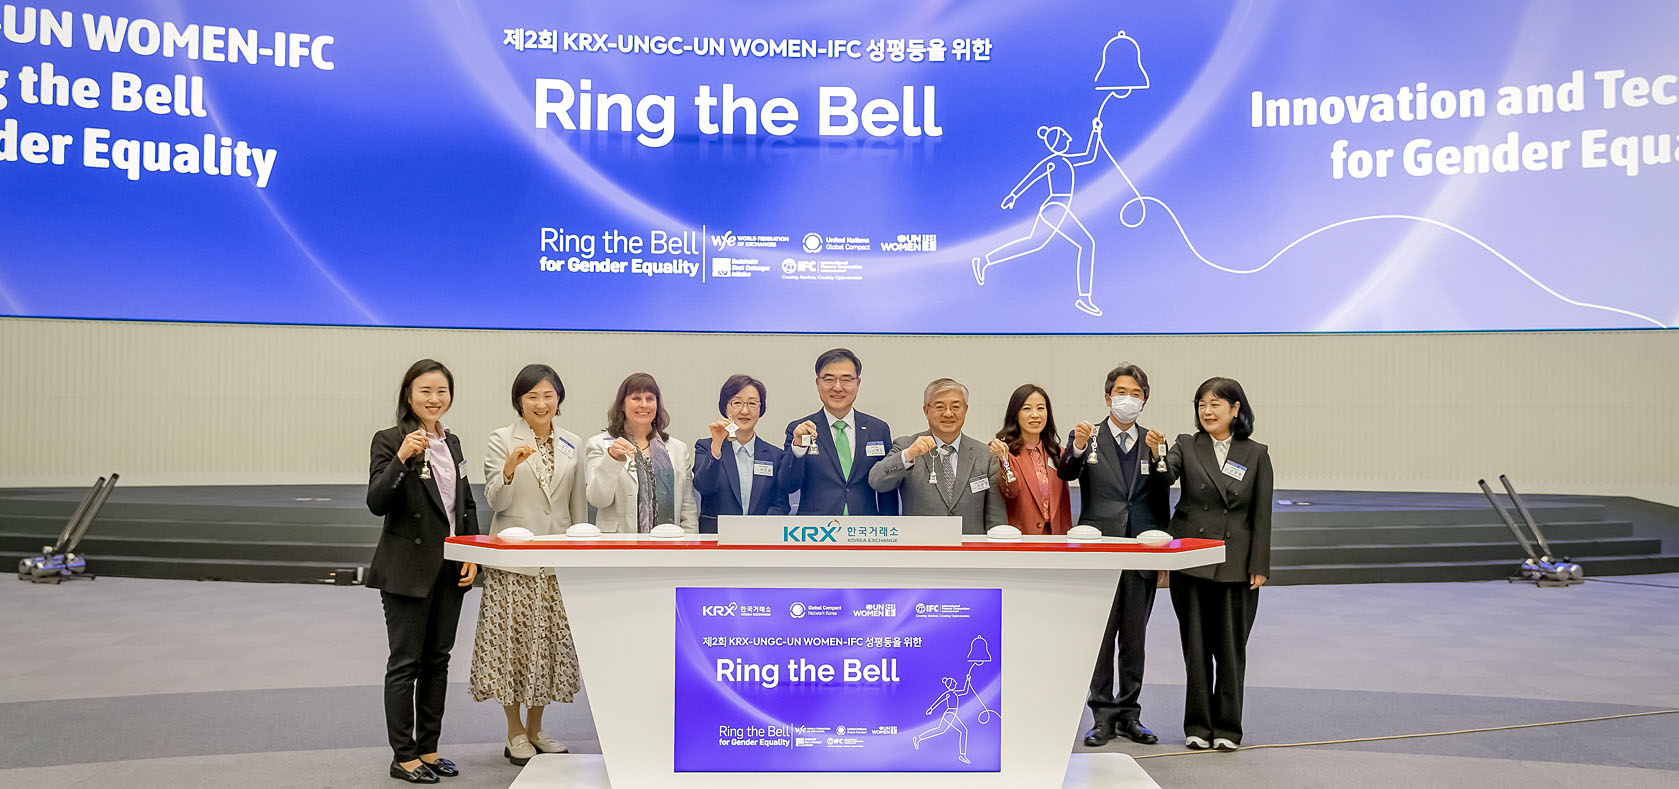 The Republic of Korea joins the “Ring the Bell” event for gender equality. Photo: UN Women/Jeong Jae Yeon